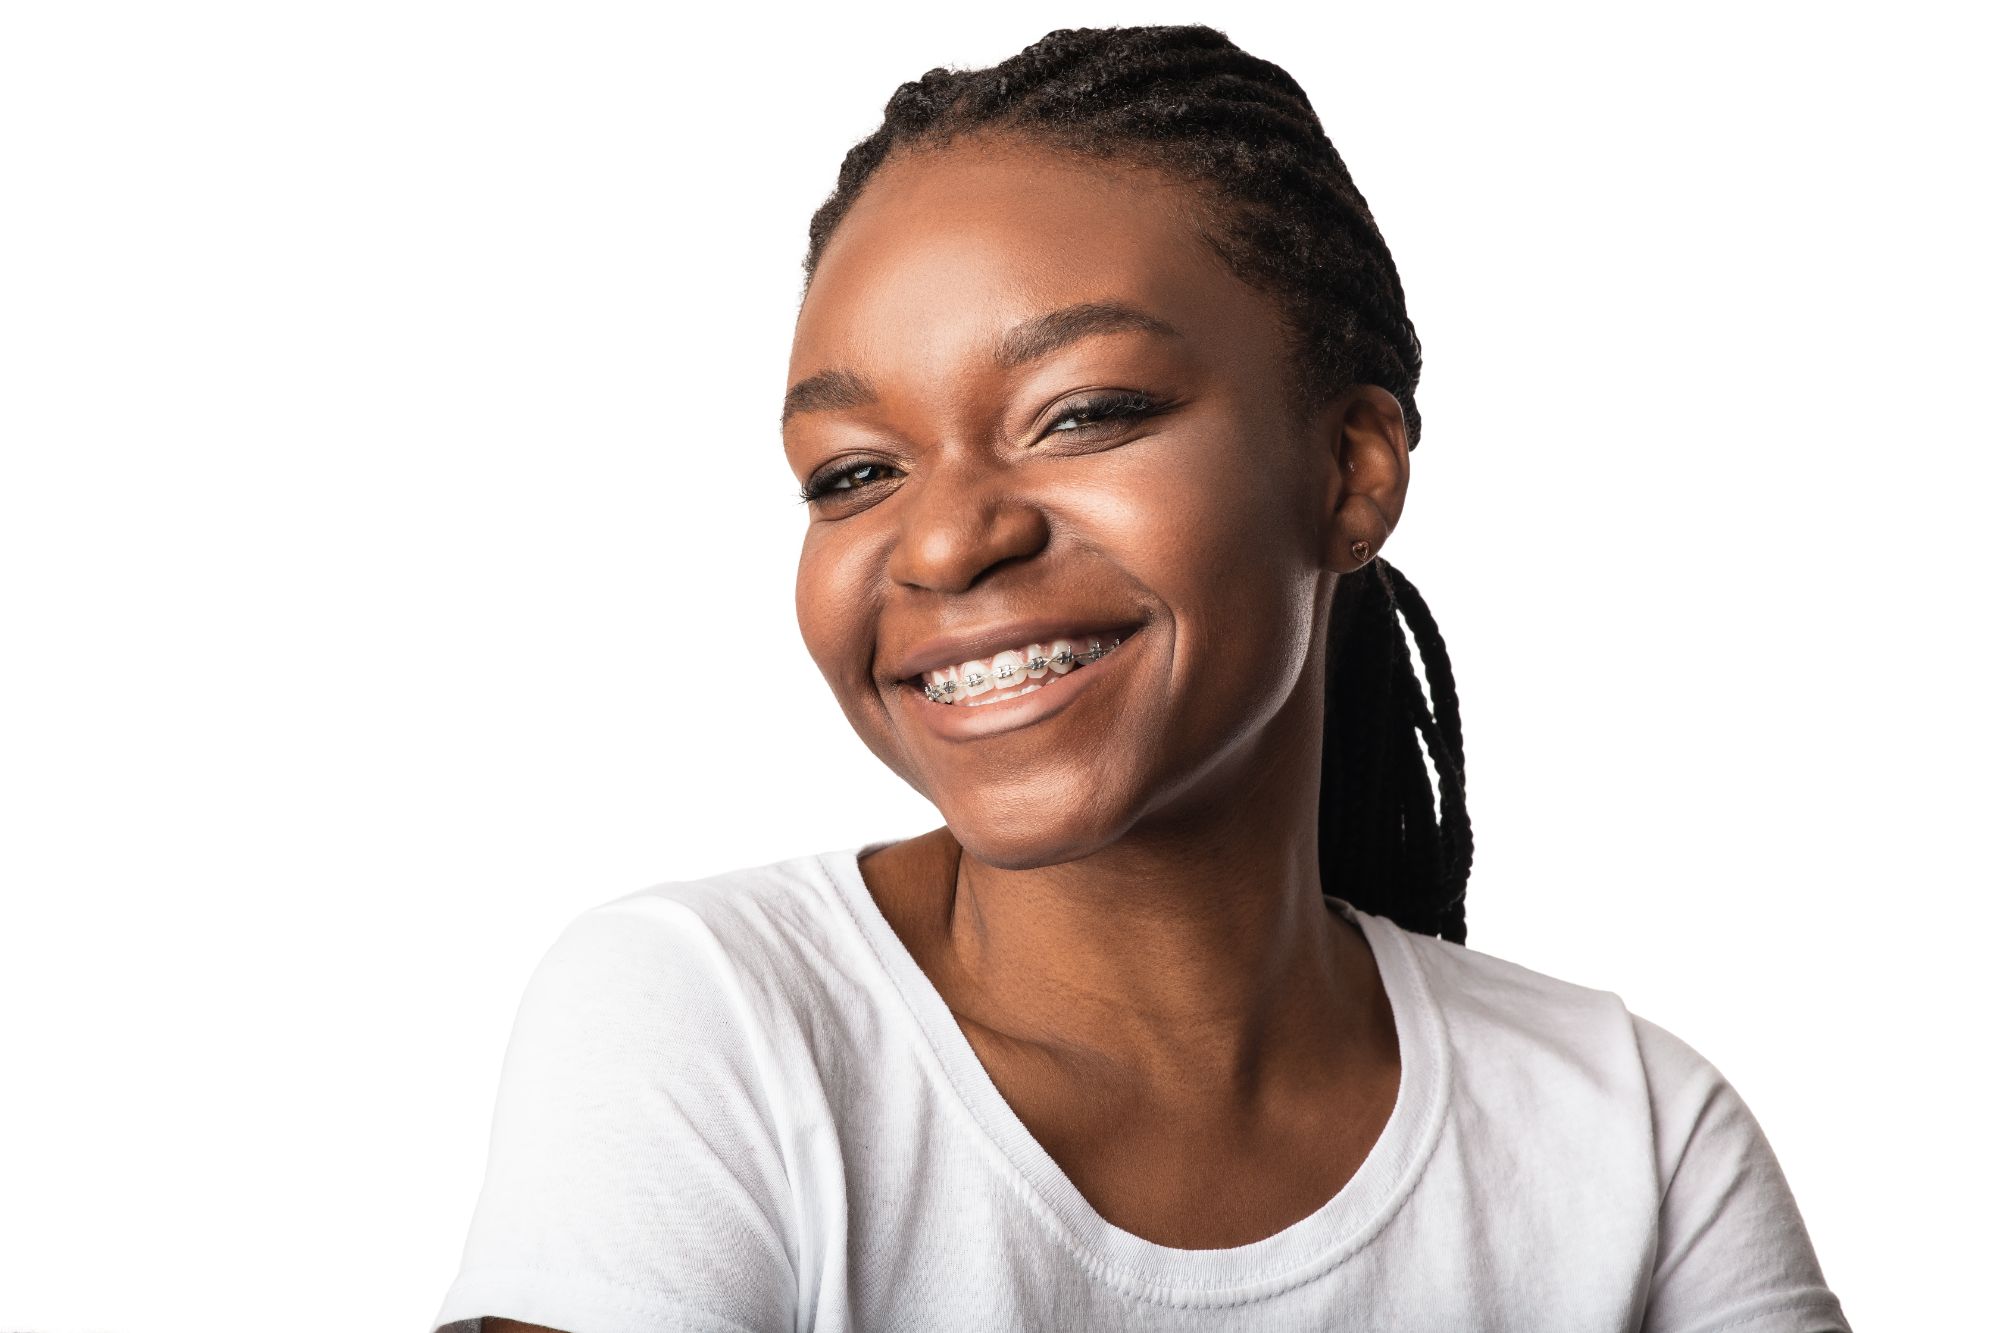 african-woman-with-dental-braces-smiling-posing-ov-8DTPAYR